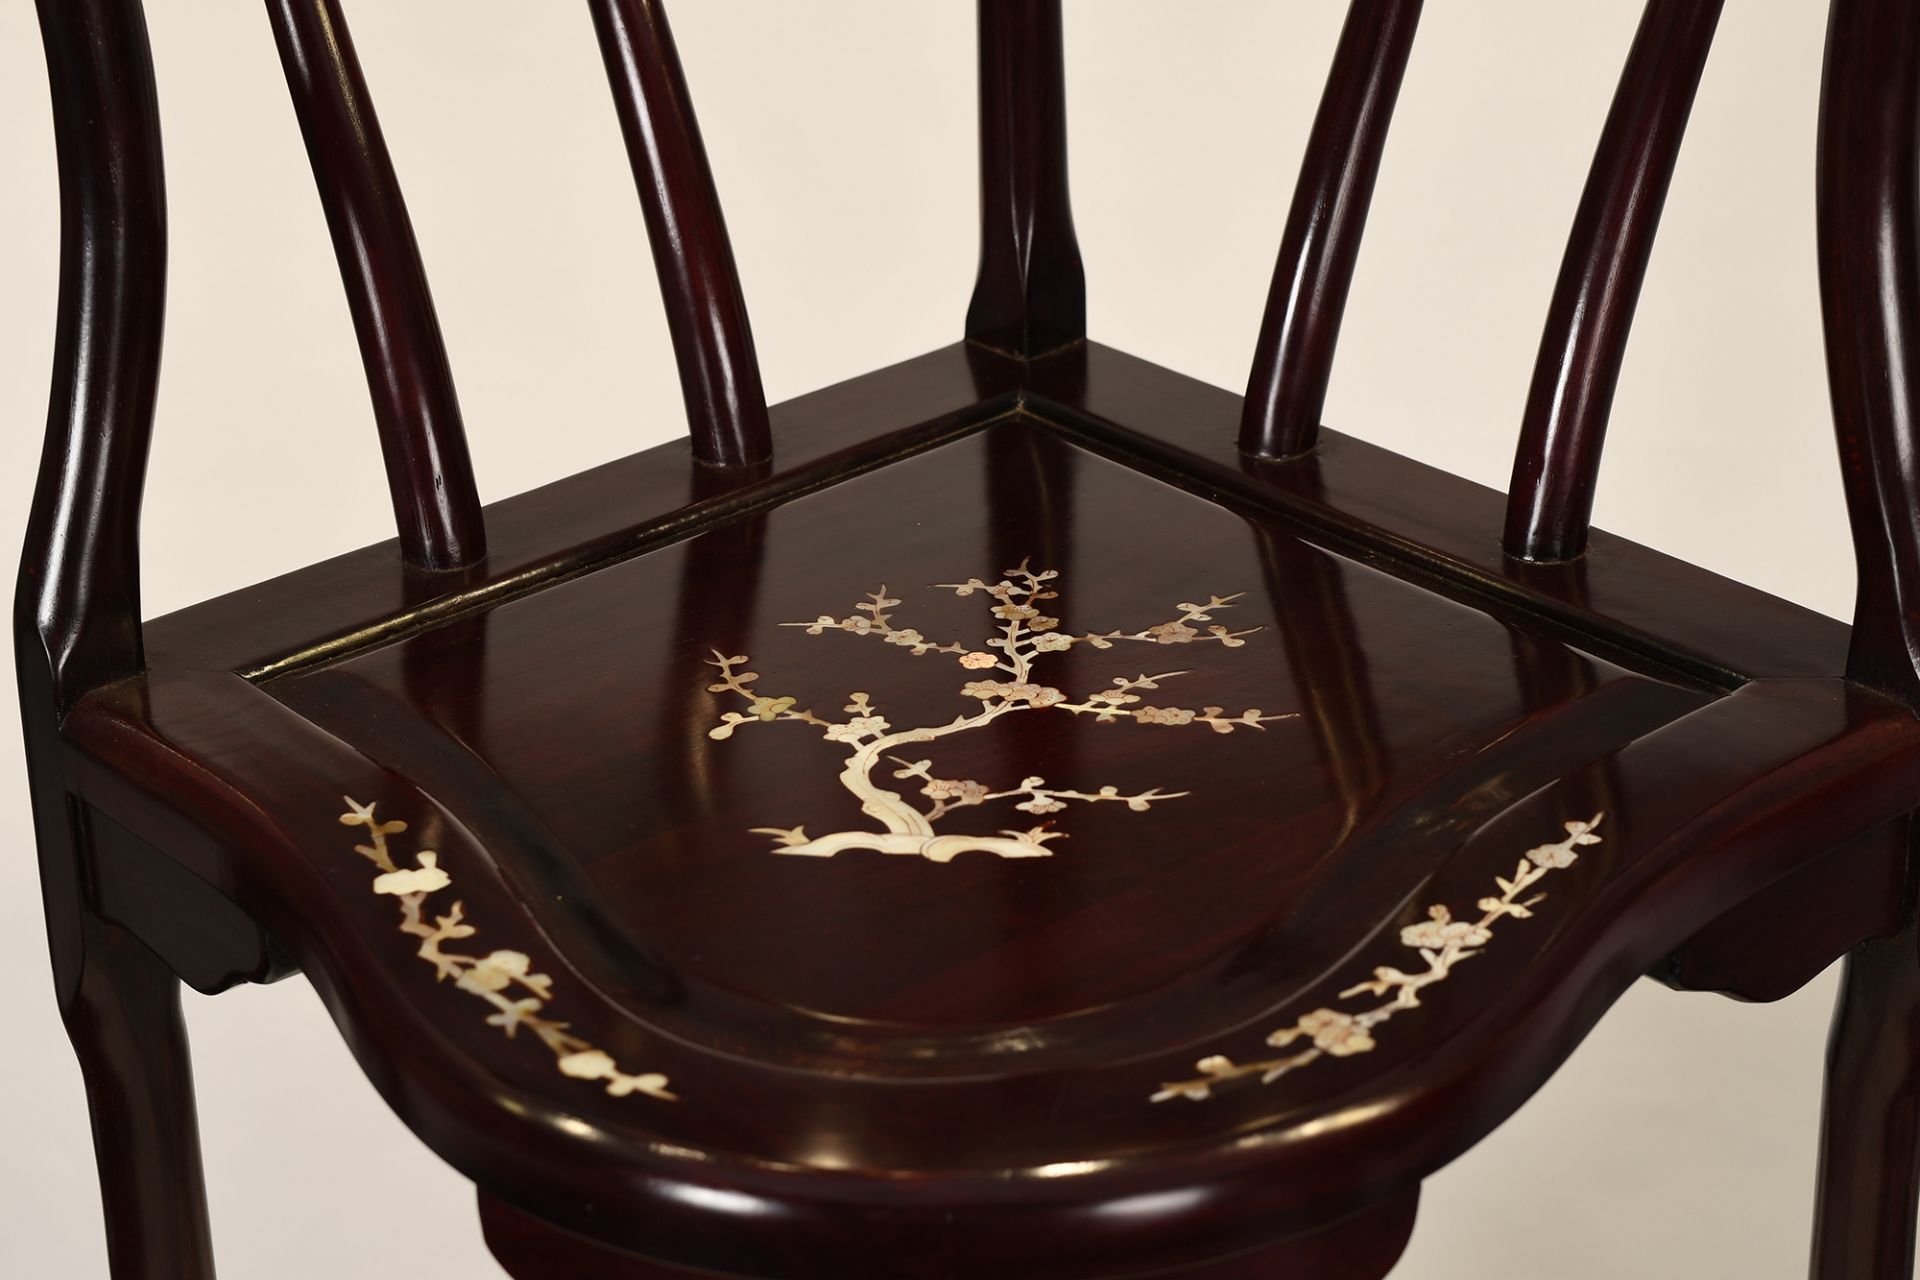 Mother Of Pearl Inlaid Chair - Image 3 of 6